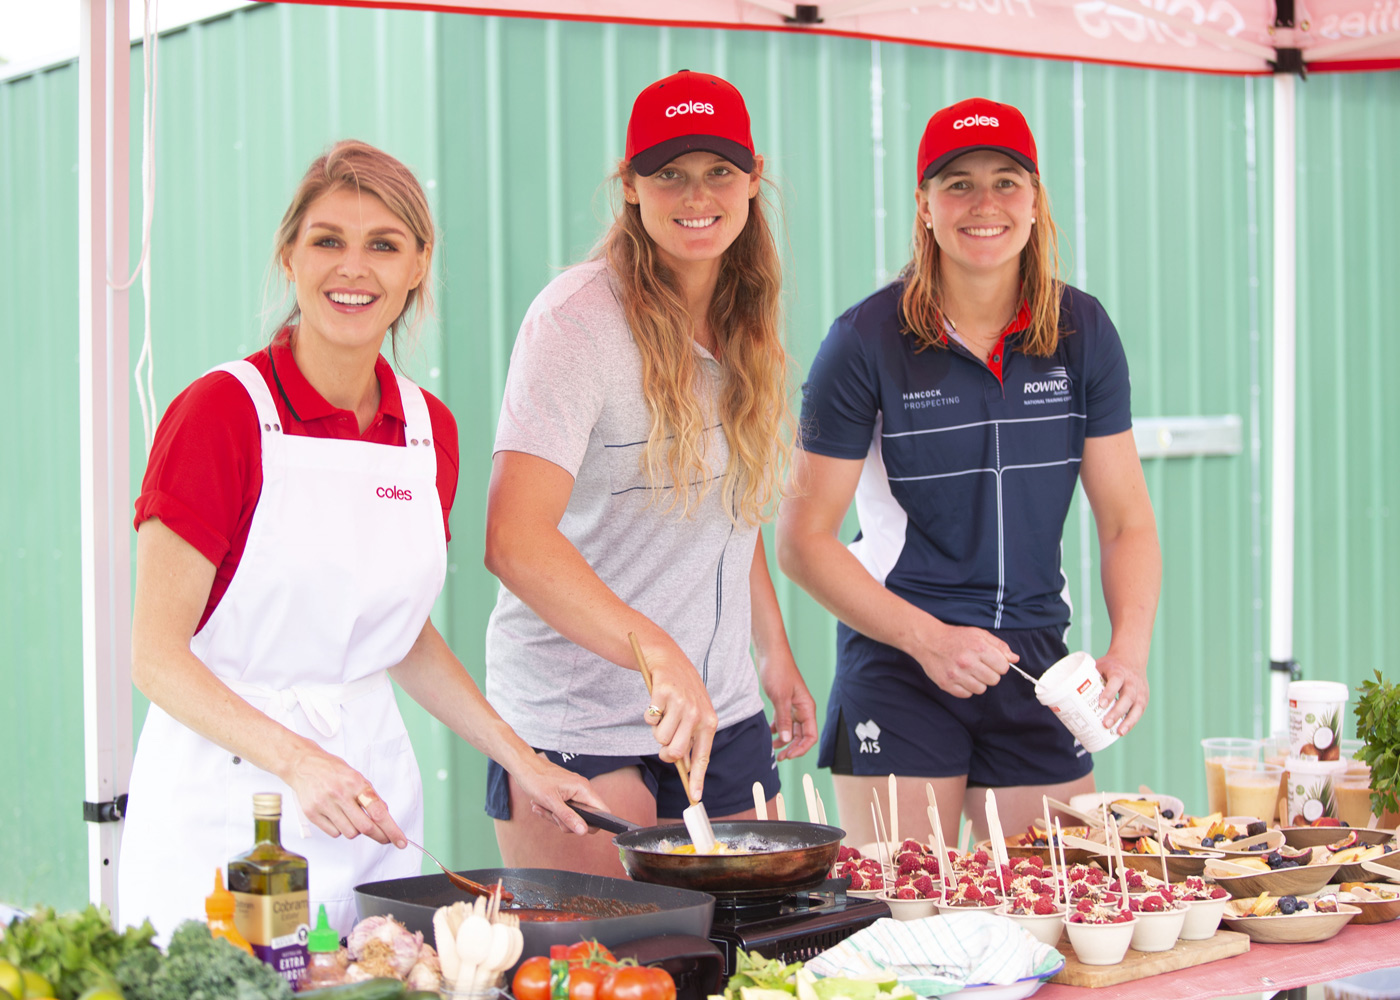 Coles Ambassador and Masterchef Courtney Roulston gives Australian rowers Georgie Rowe and Harriet Hudson some tips